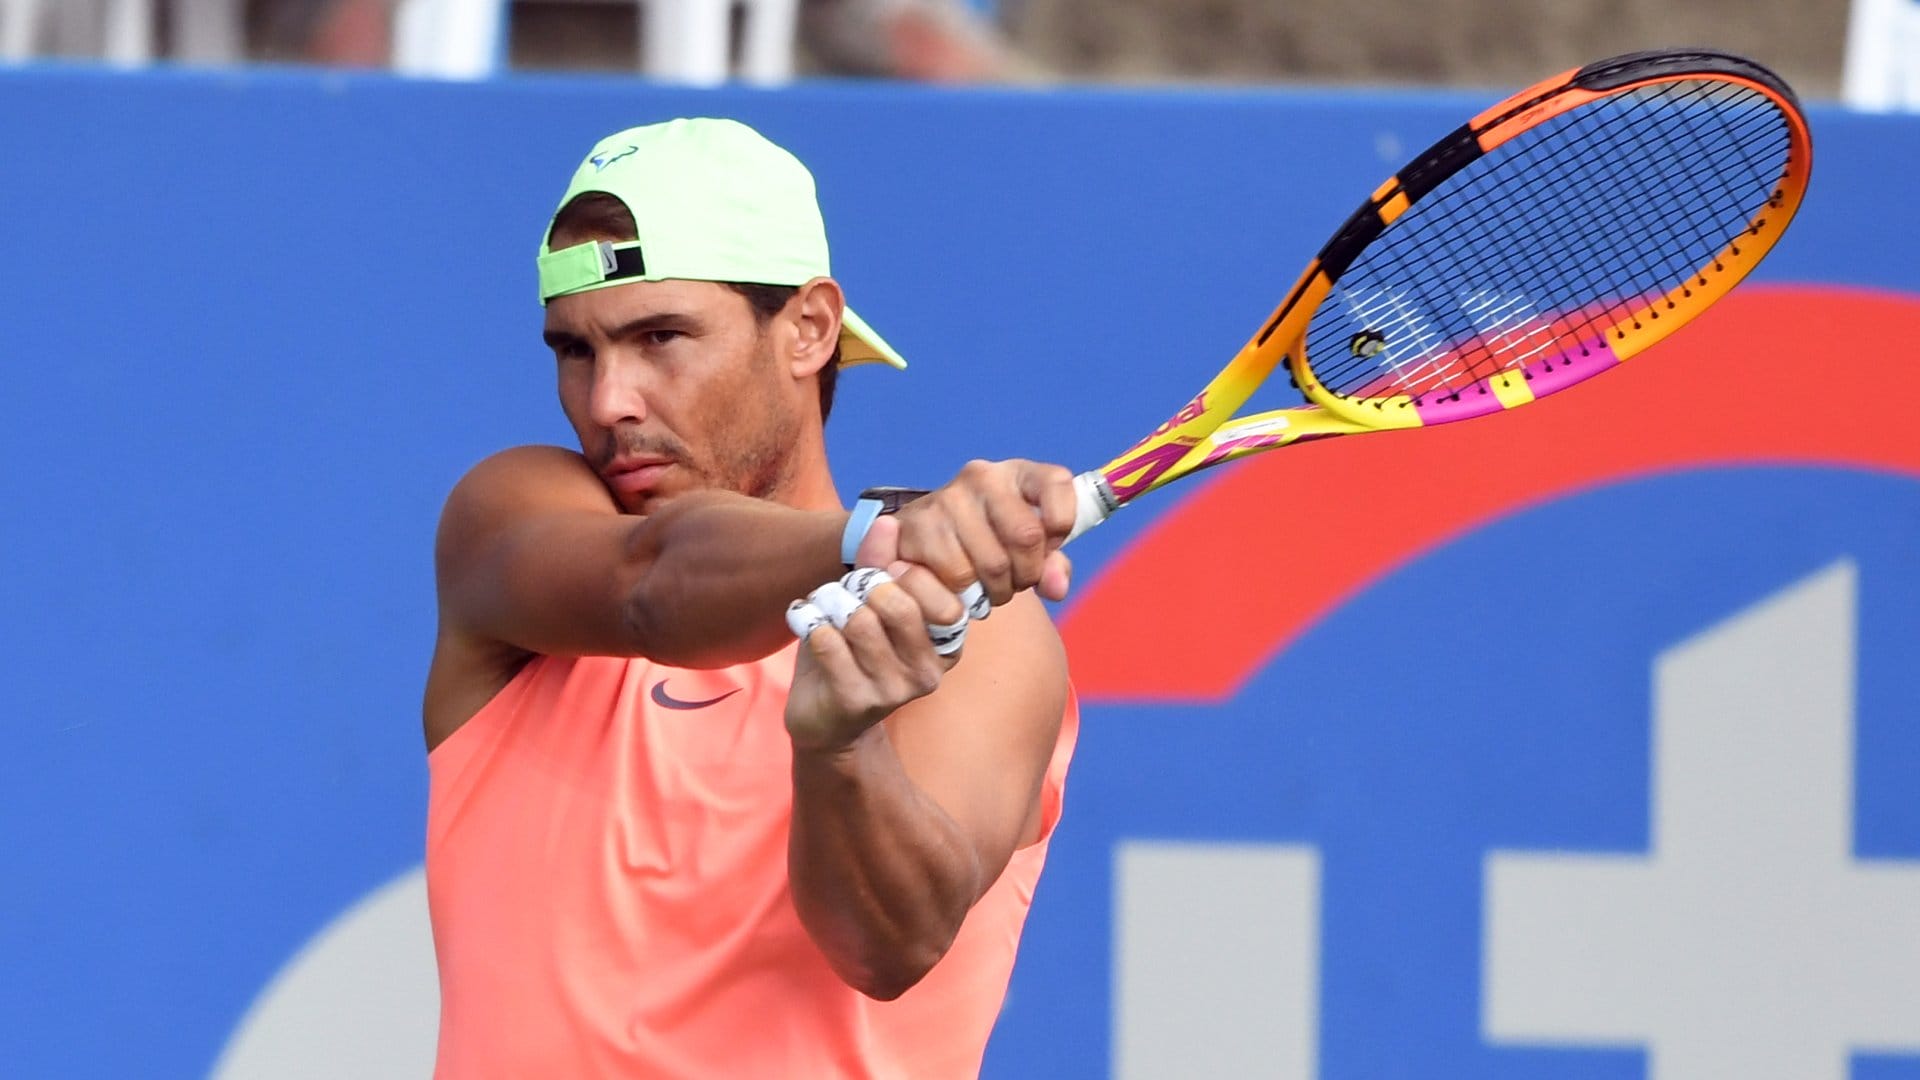 WASHINGTON, DC - AUGUST 01: Rafael Nadal of Spain hits the ball during a practice session on Day 2 during the Citi Open at Rock Creek Tennis Center on August 1, 2021 in Washington, DC. (Photo by Mitchell Layton/Getty Images)